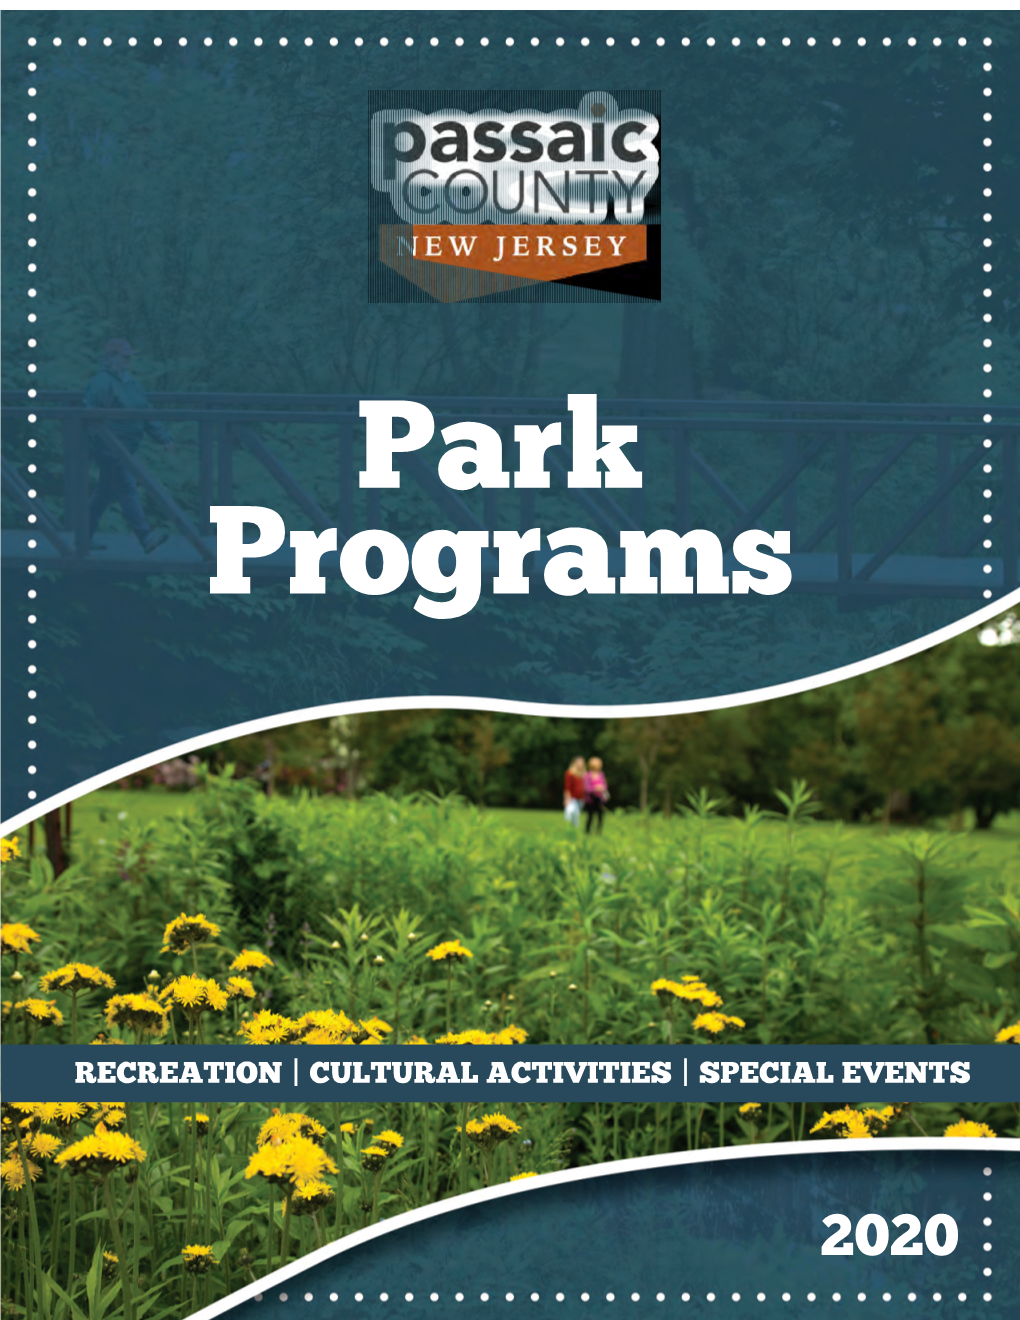 Recreation | Cultural Activities | Special Events